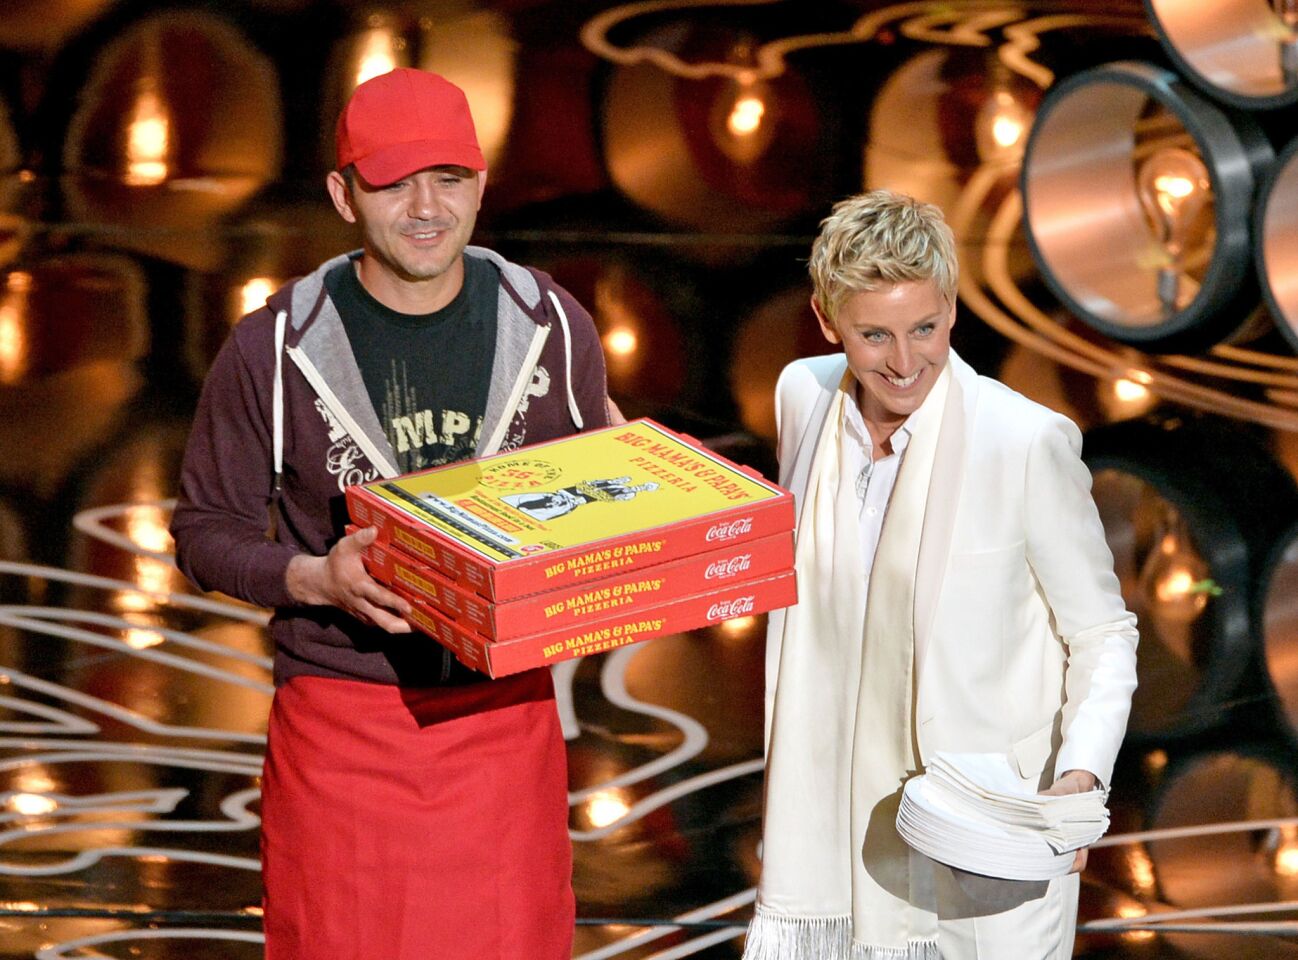 Ellen DeGeneres has pizza from Big Mama's & Papa's Pizzeria served to guests.